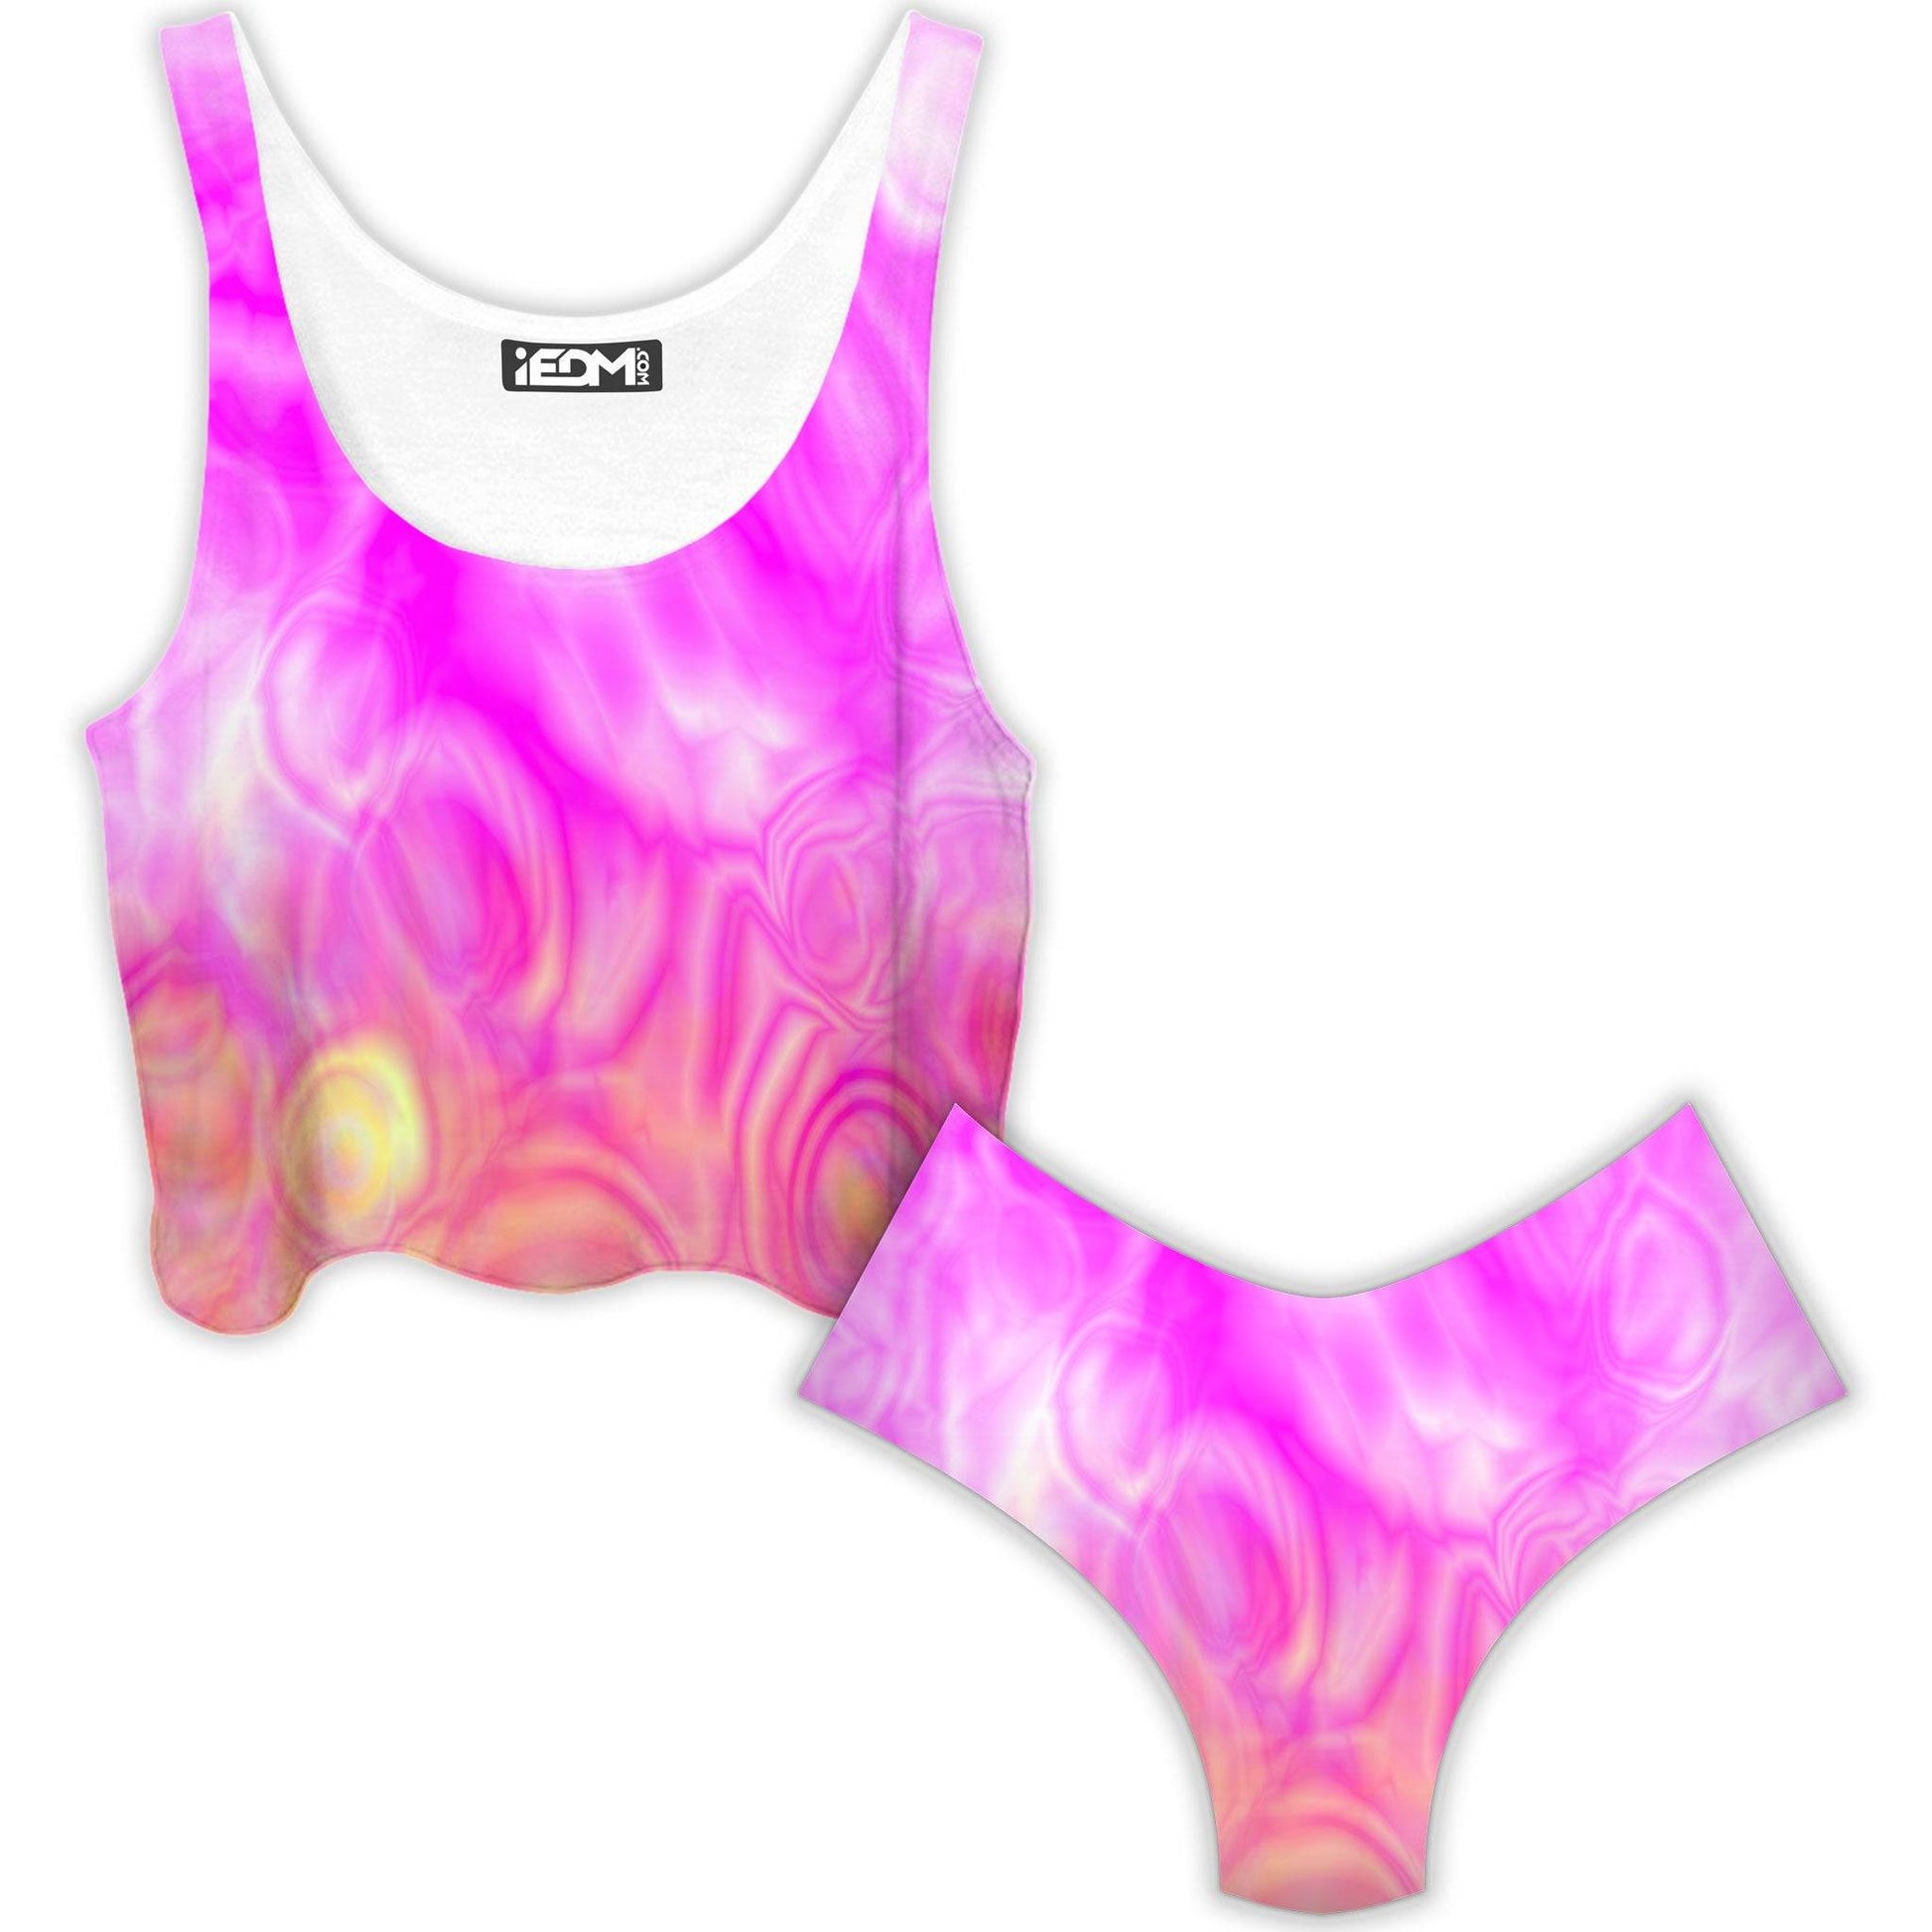 Daydream Crop Top and Booty Shorts Combo, Yantrart Design, | iEDM